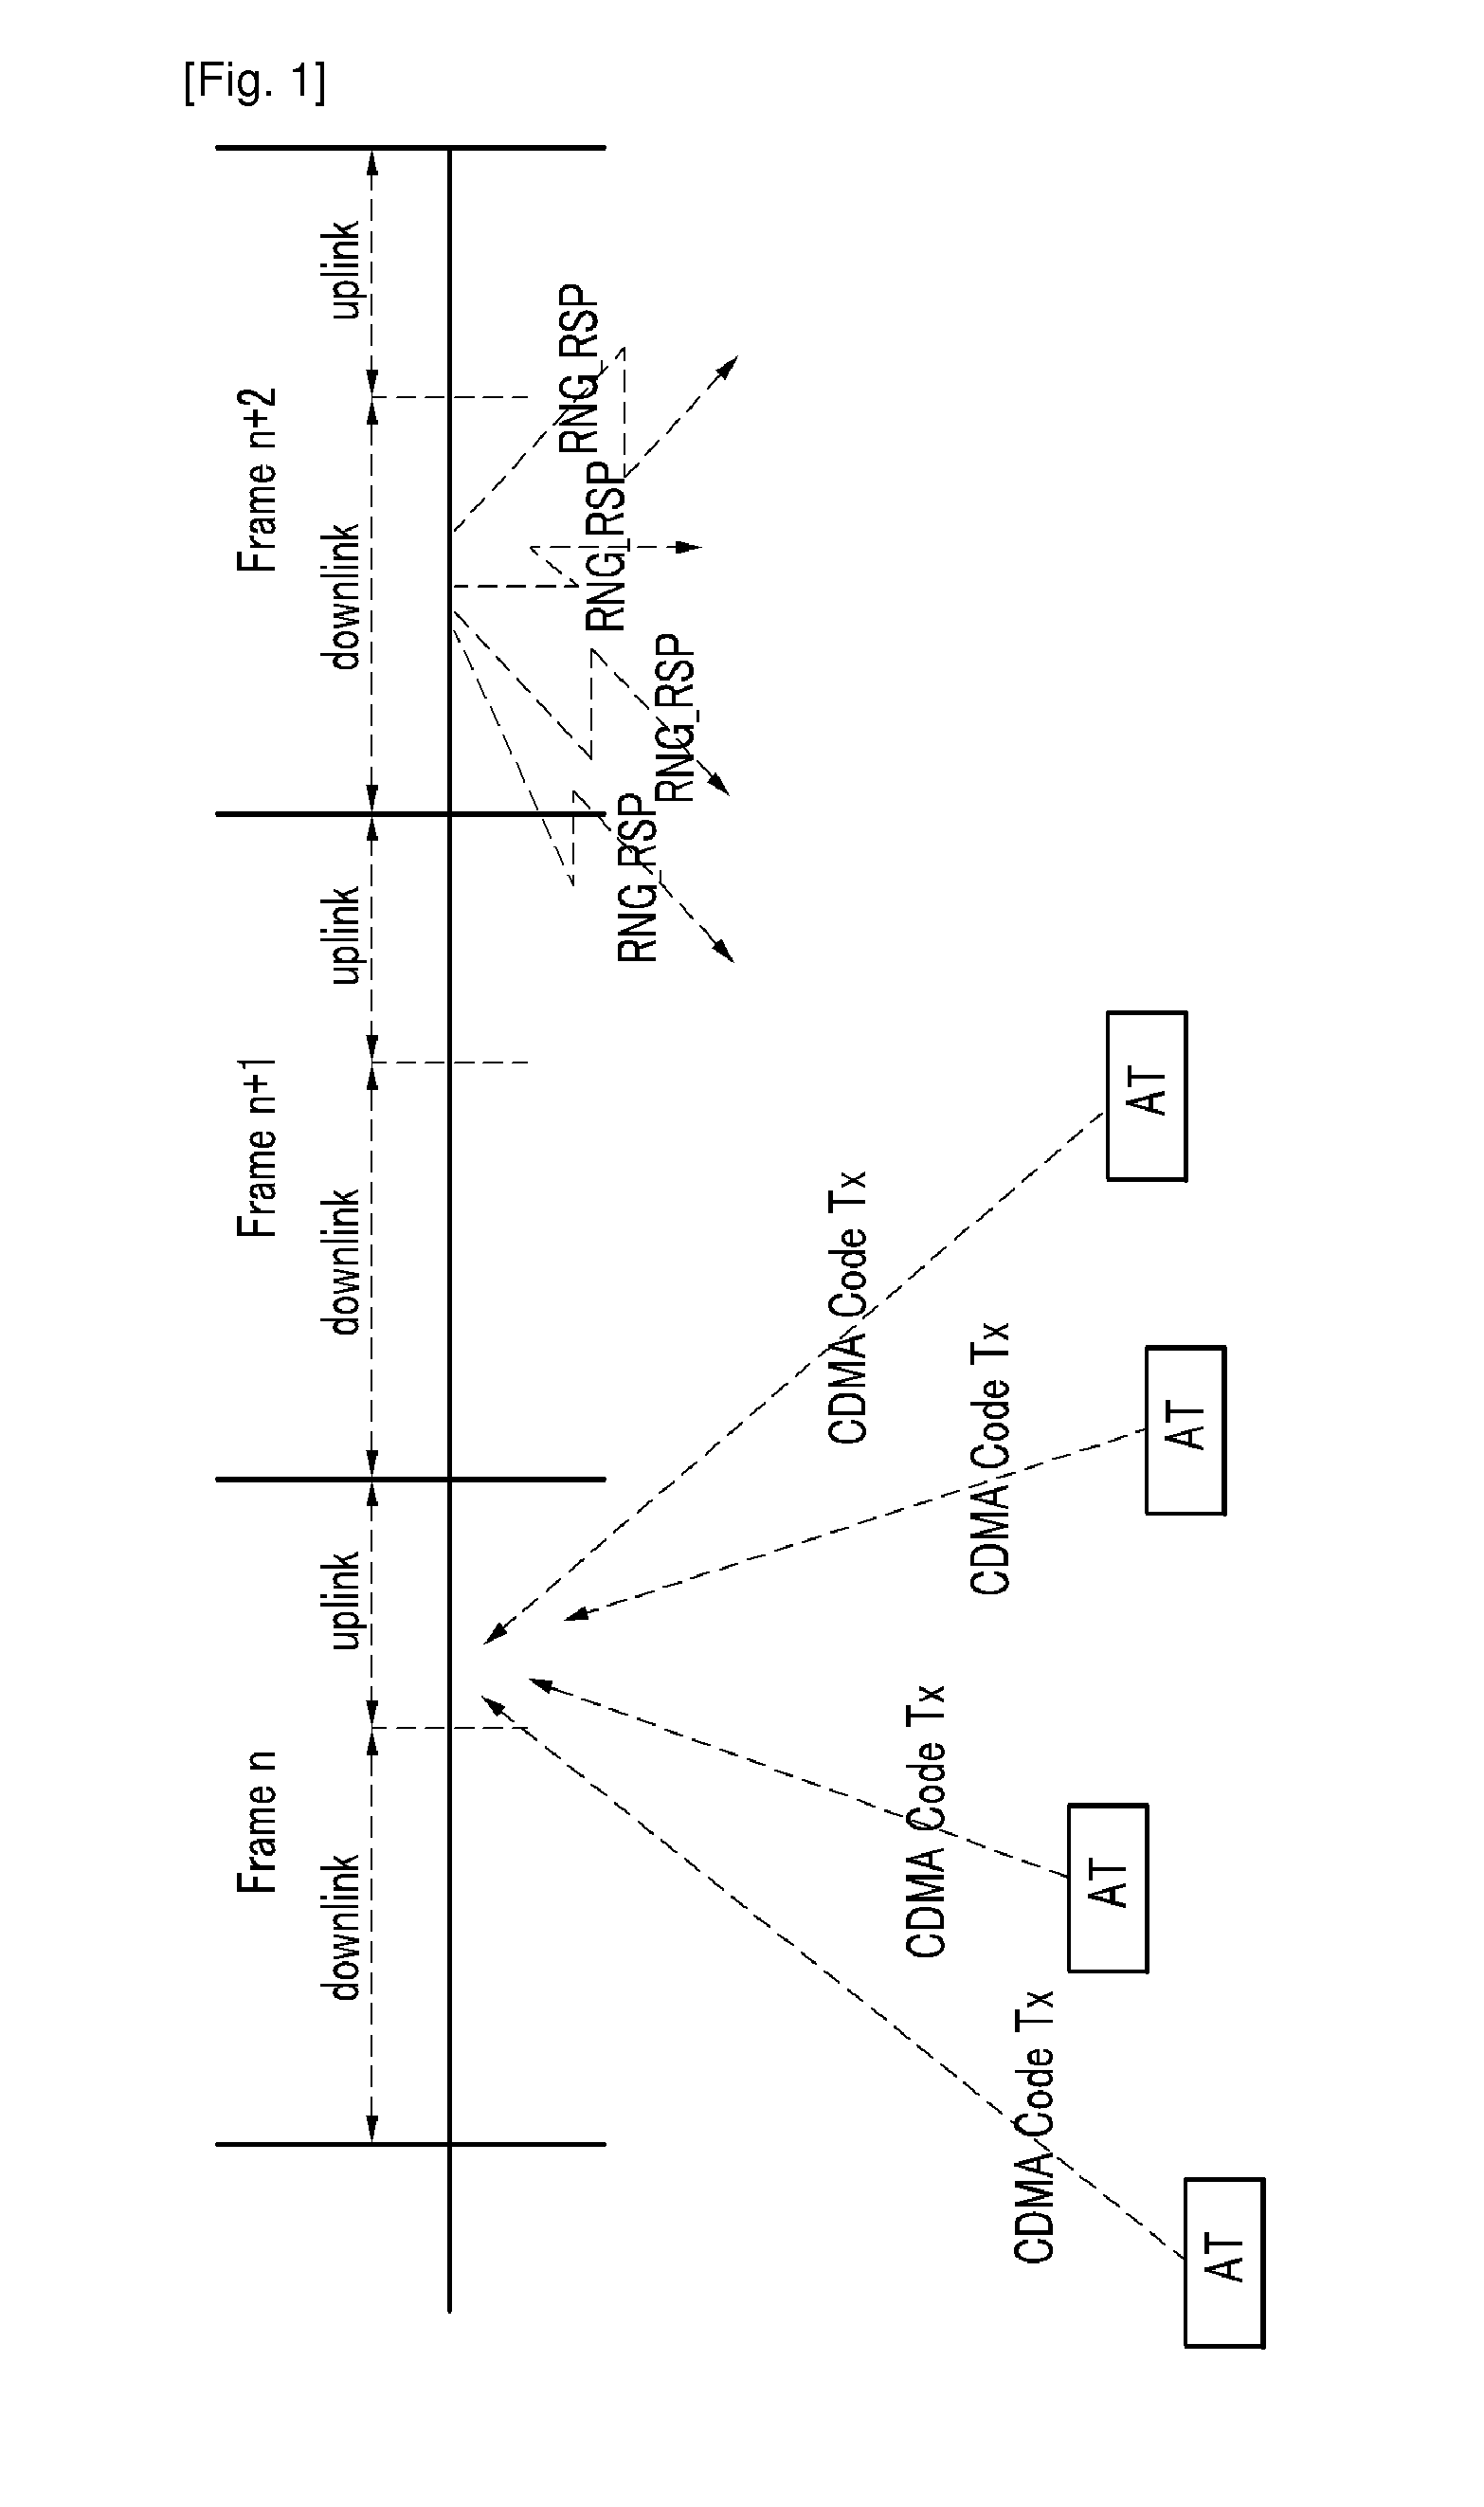 Method of generating and processing ranging response message in wireless communication system